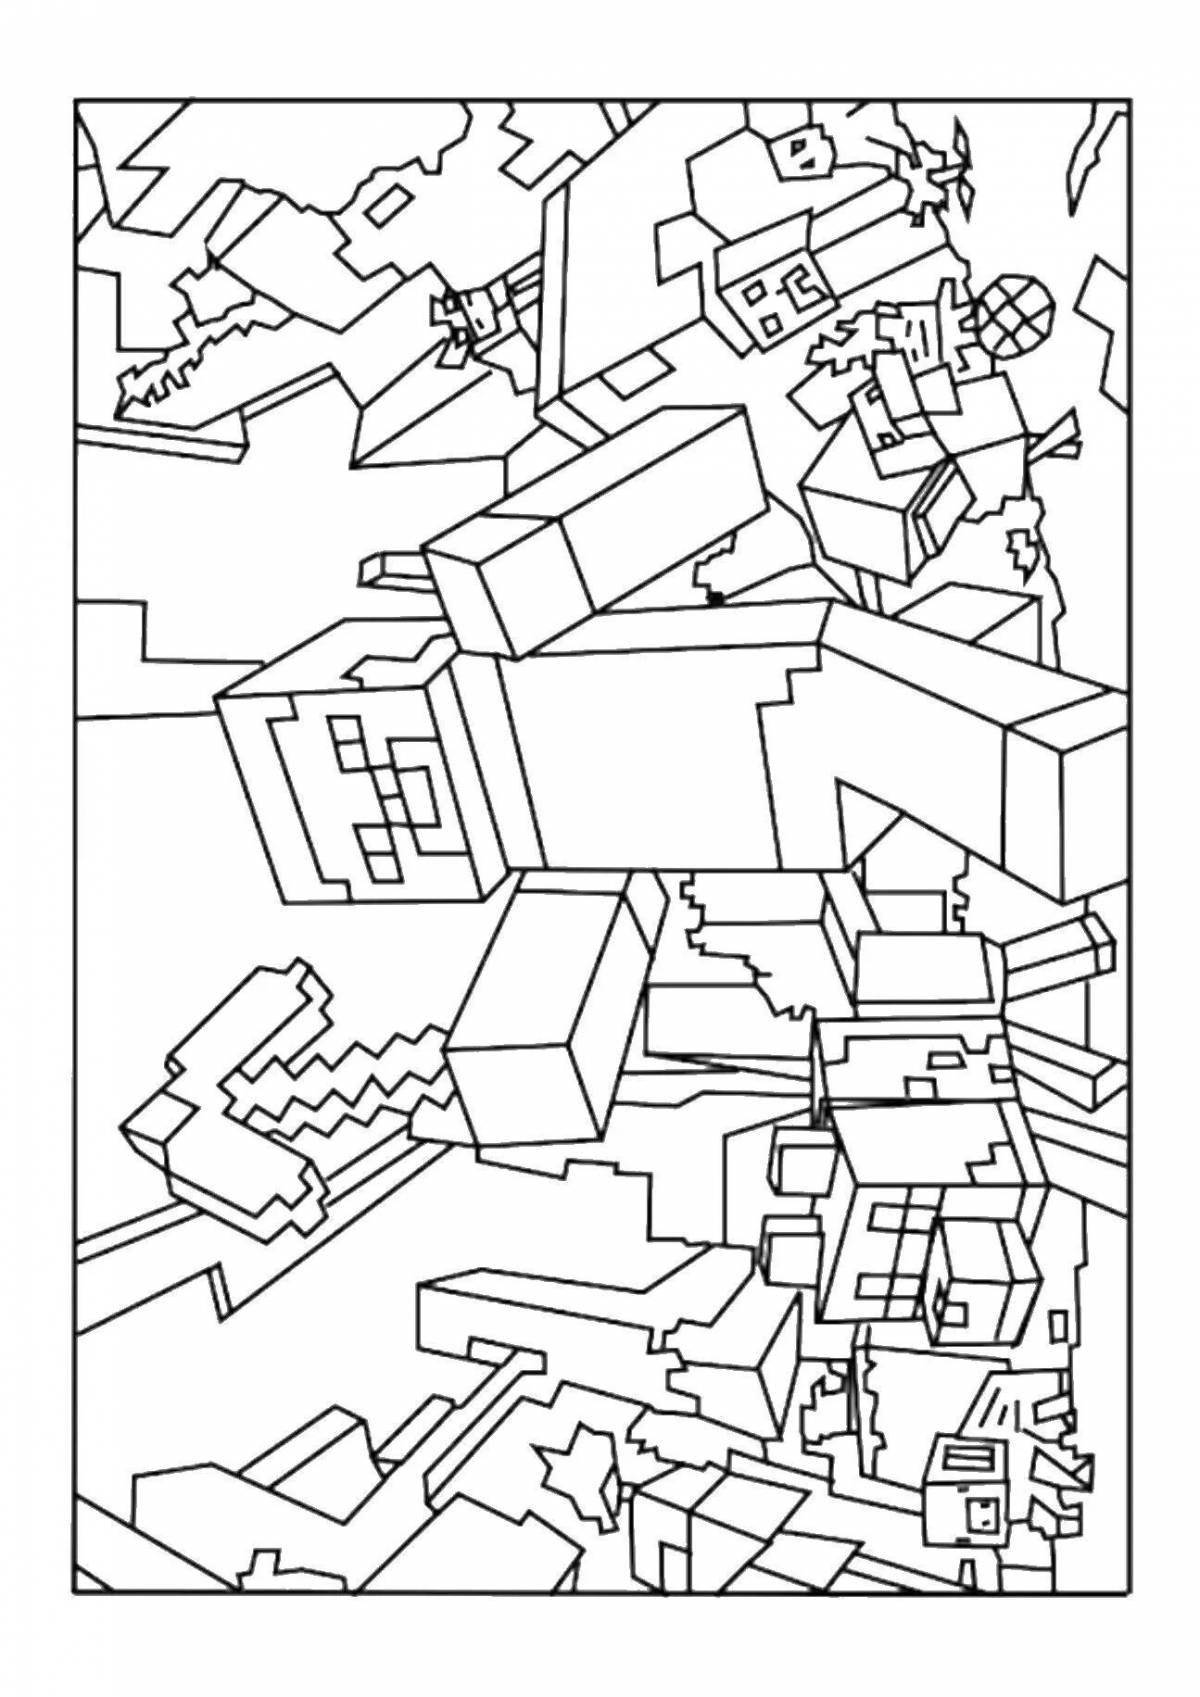 Awesome minecraft city coloring page